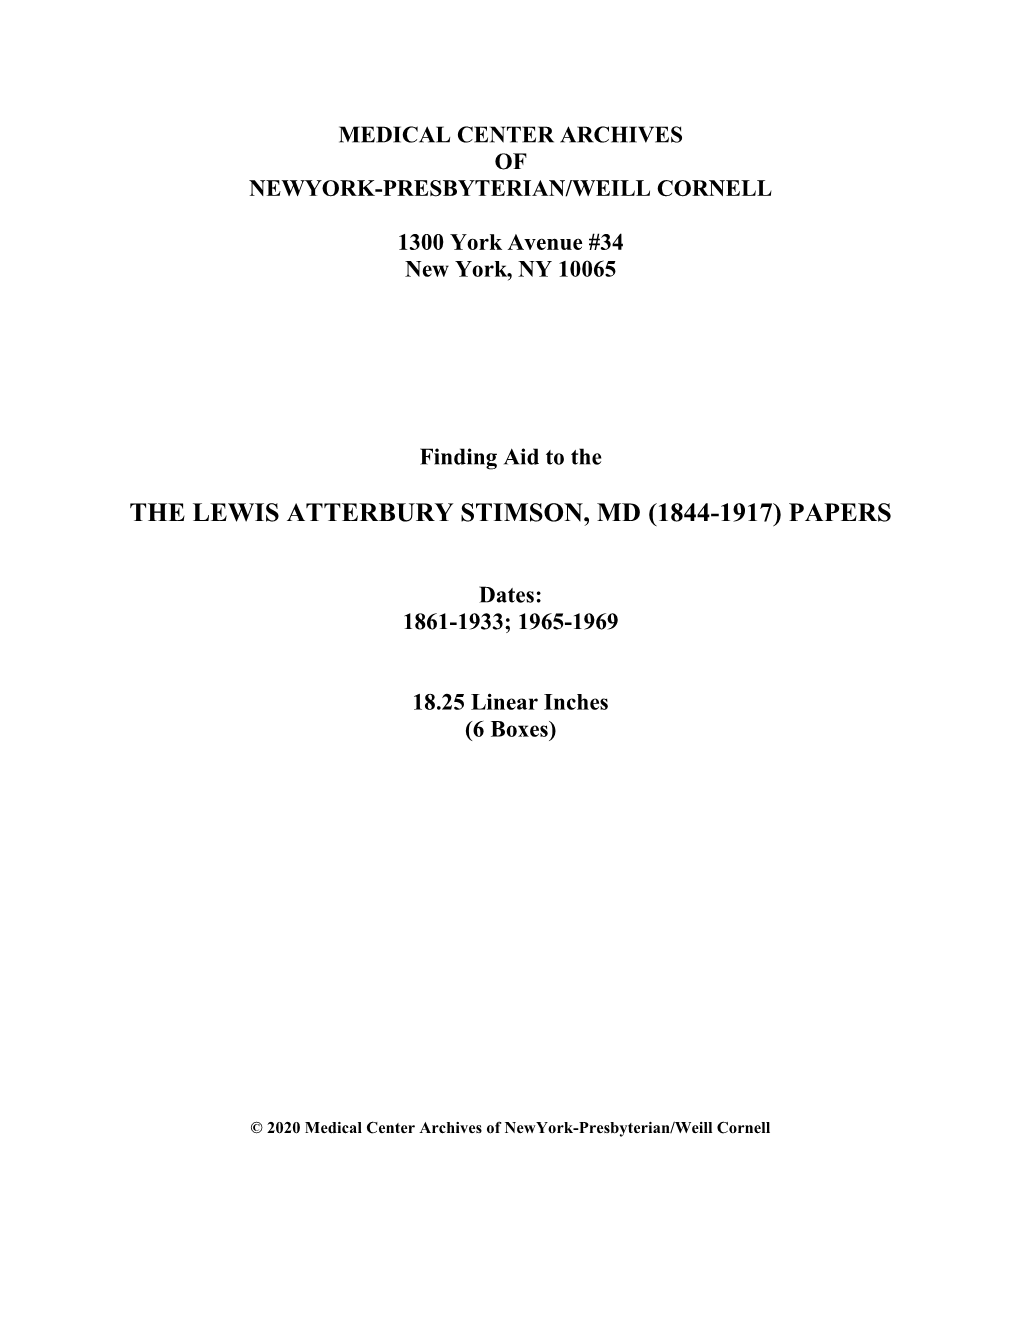 The Lewis Atterbury Stimson, Md (1844-1917) Papers